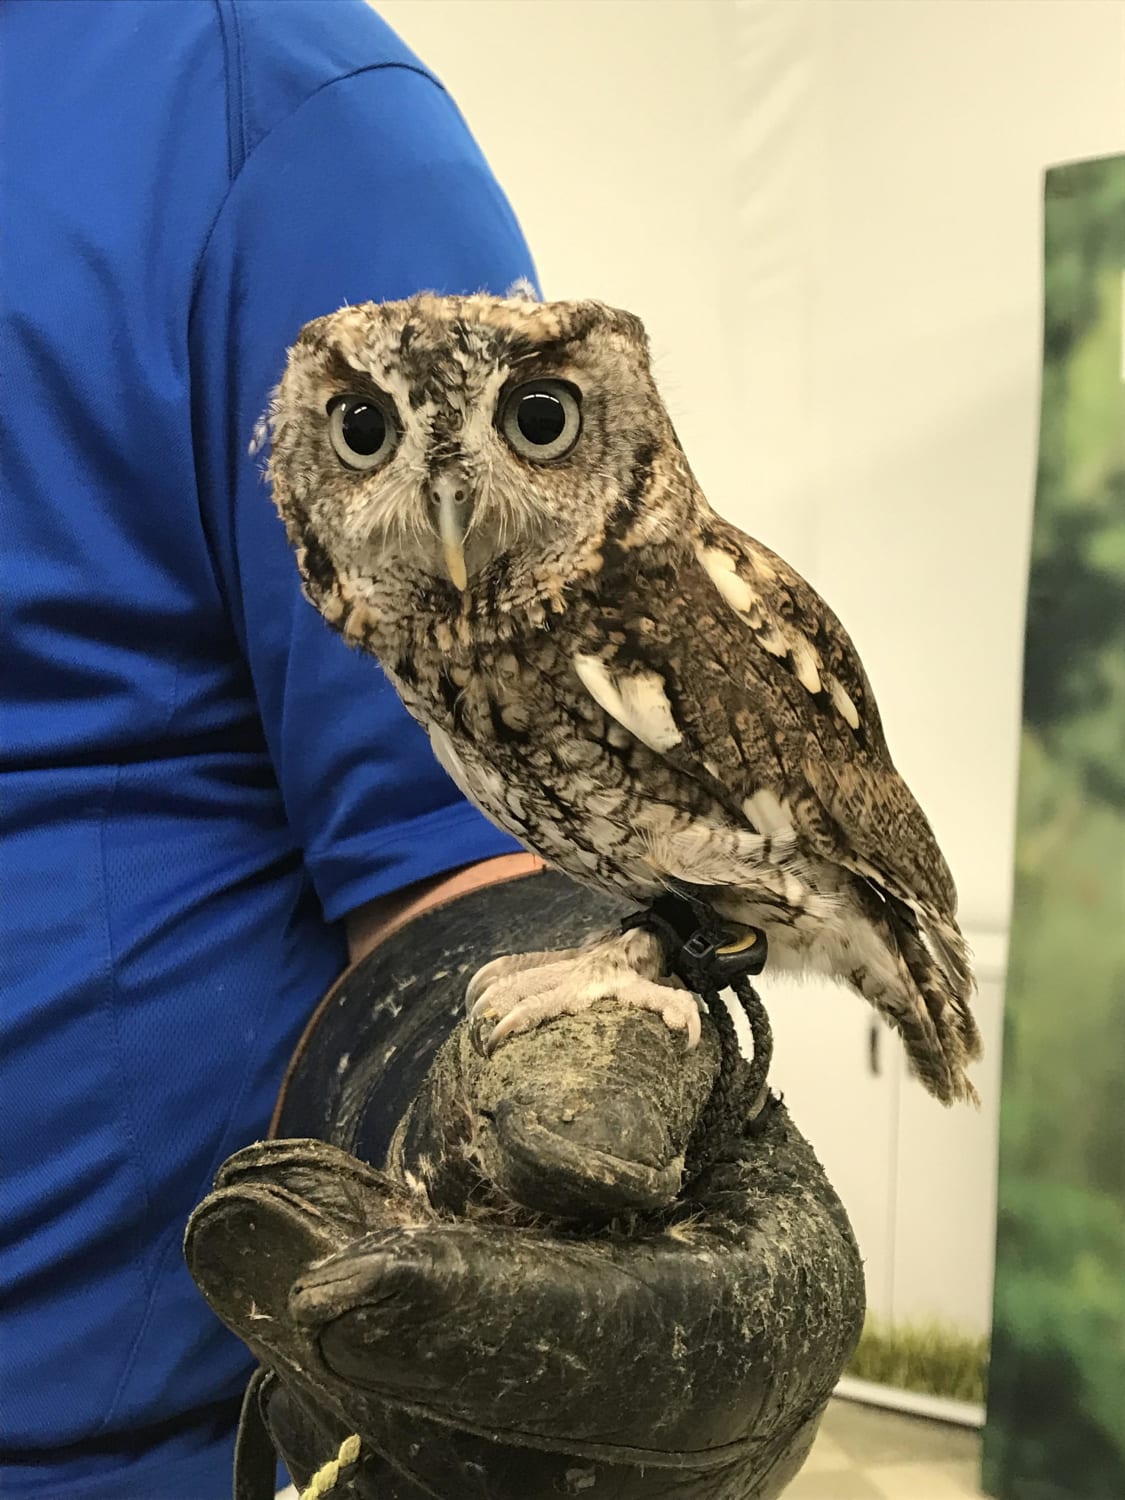 Meet Luna, from Pittsburgh’s National Aviary.